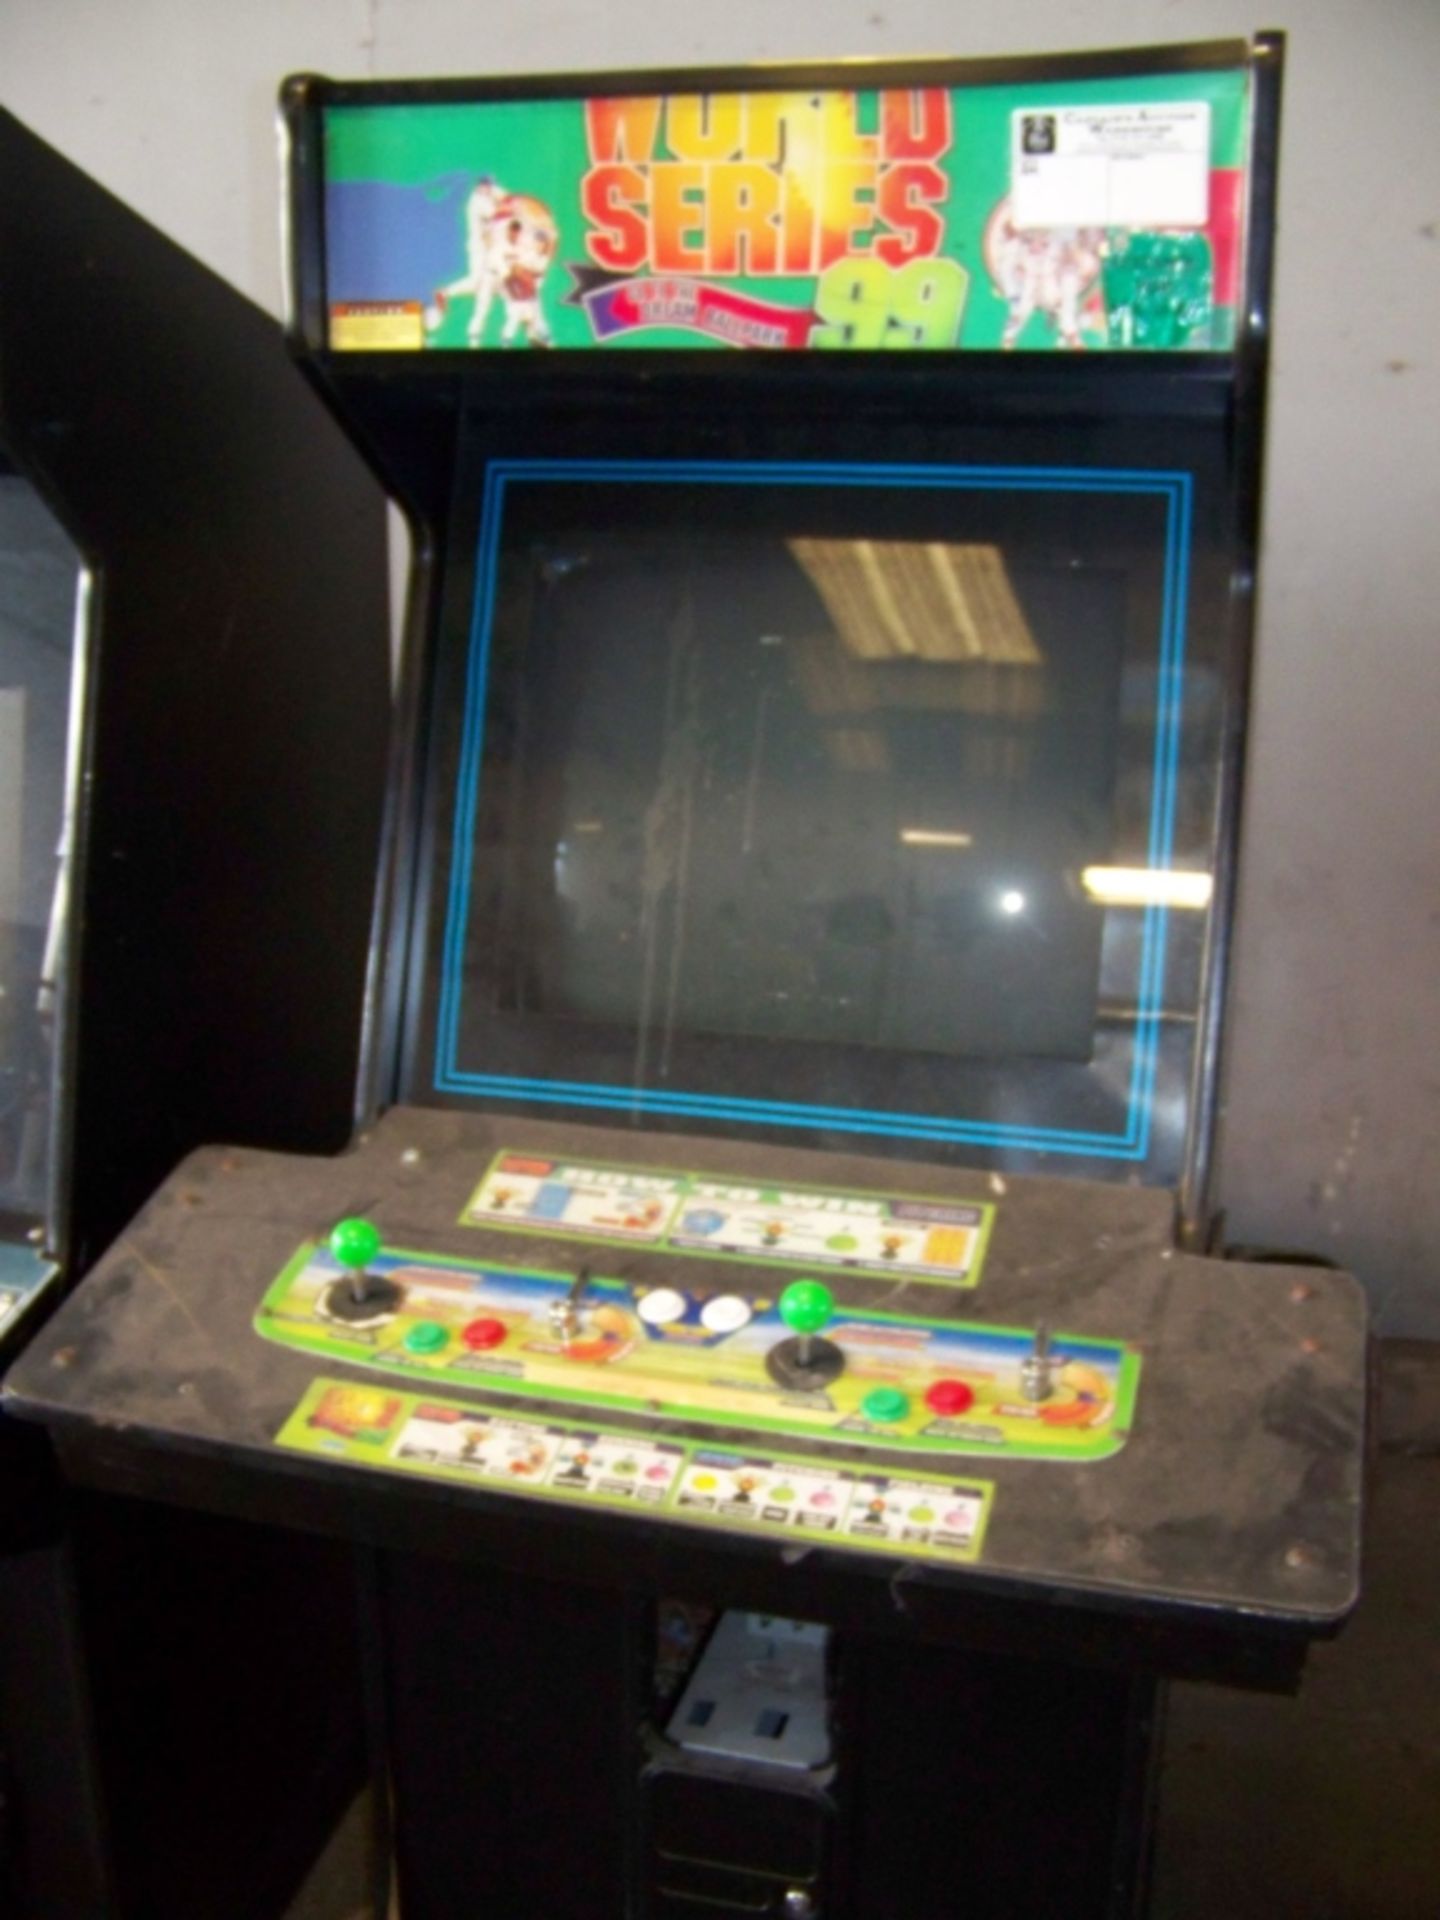 WORLD SERIES 99 BASEBALL ARCADE GAME SEGA Item is in used condition. Evidence of wear and commercial - Image 2 of 2